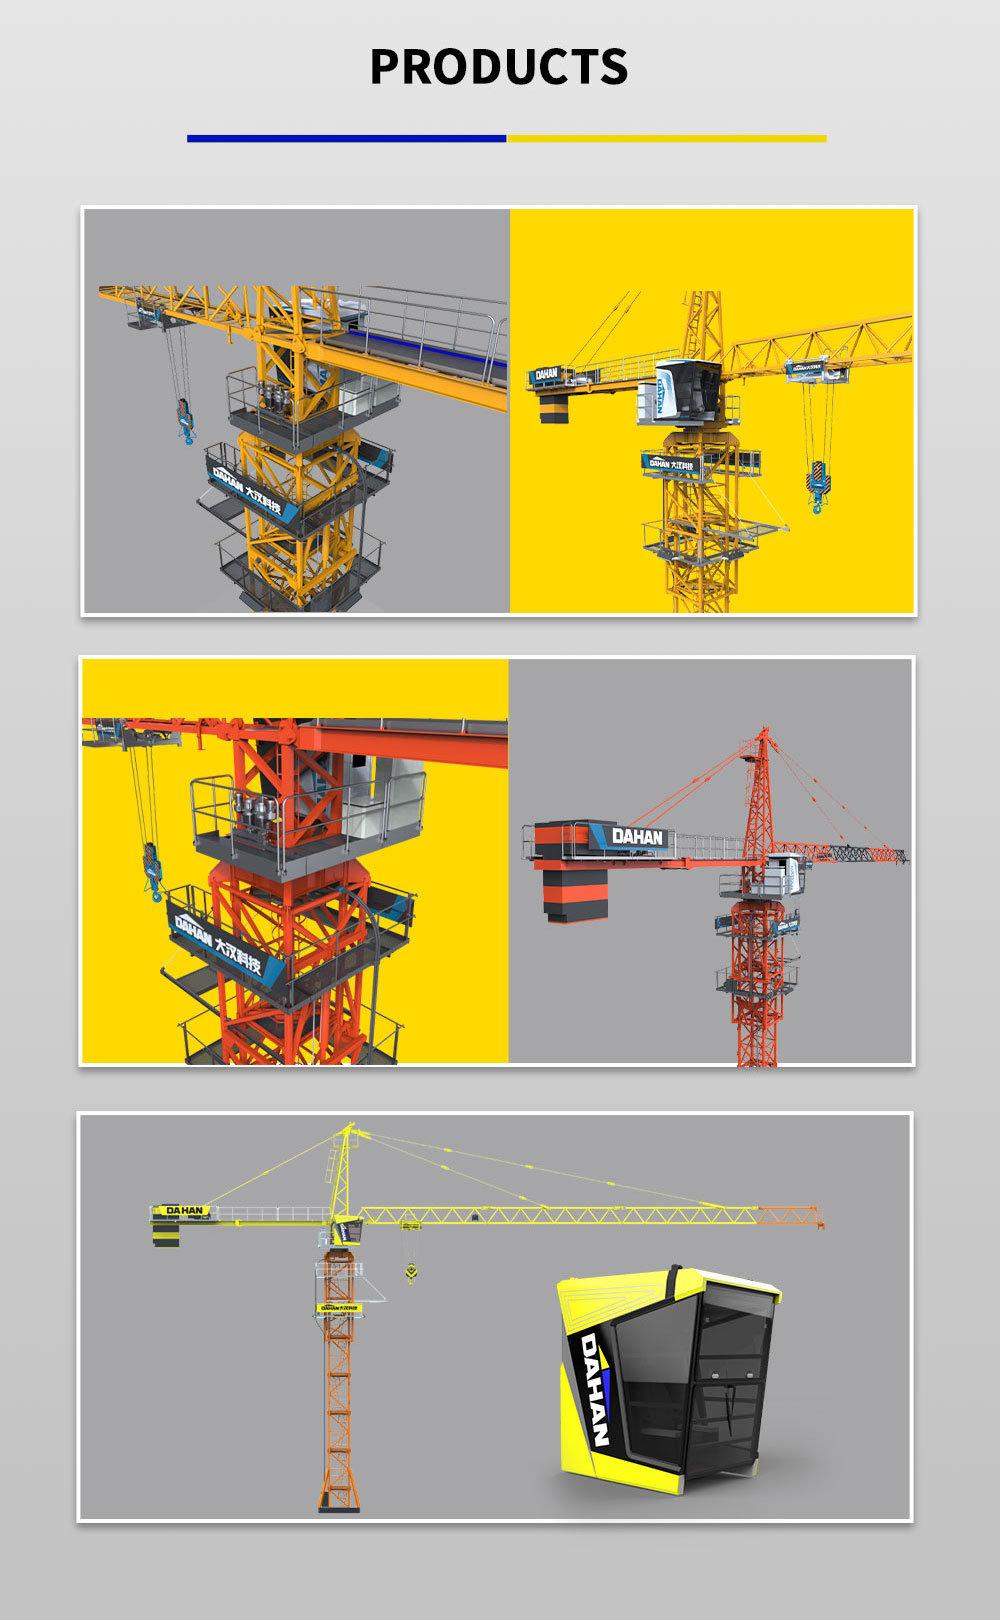 China-Made Building Construction Tower Cap Tower Crane Construction Equipment